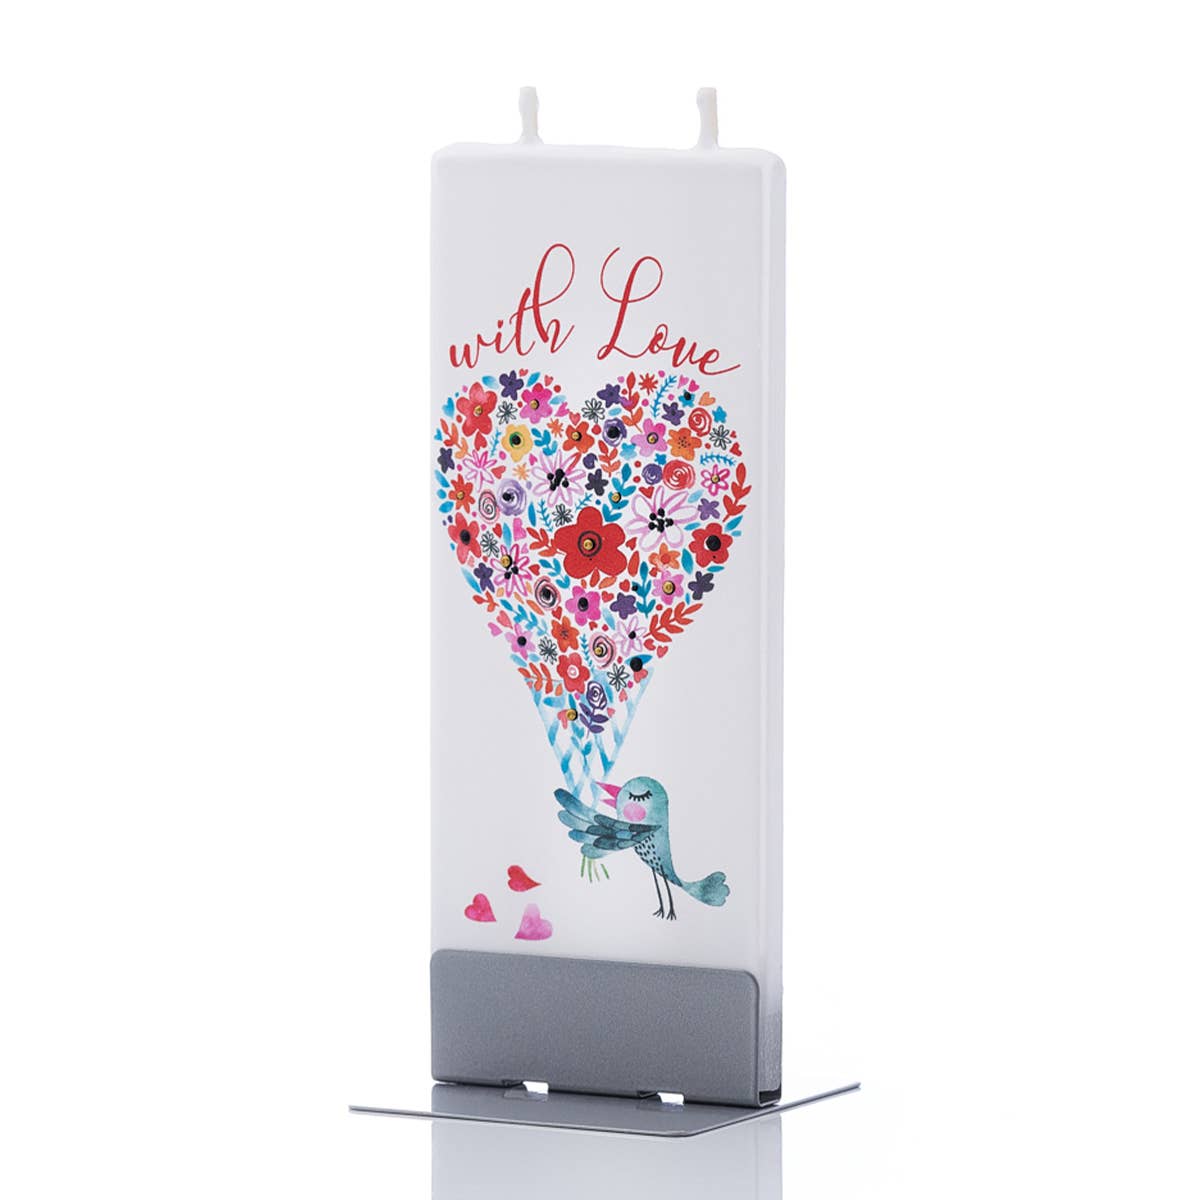 Flat Hand-crafted Candle - Love Bird with Floral Heart